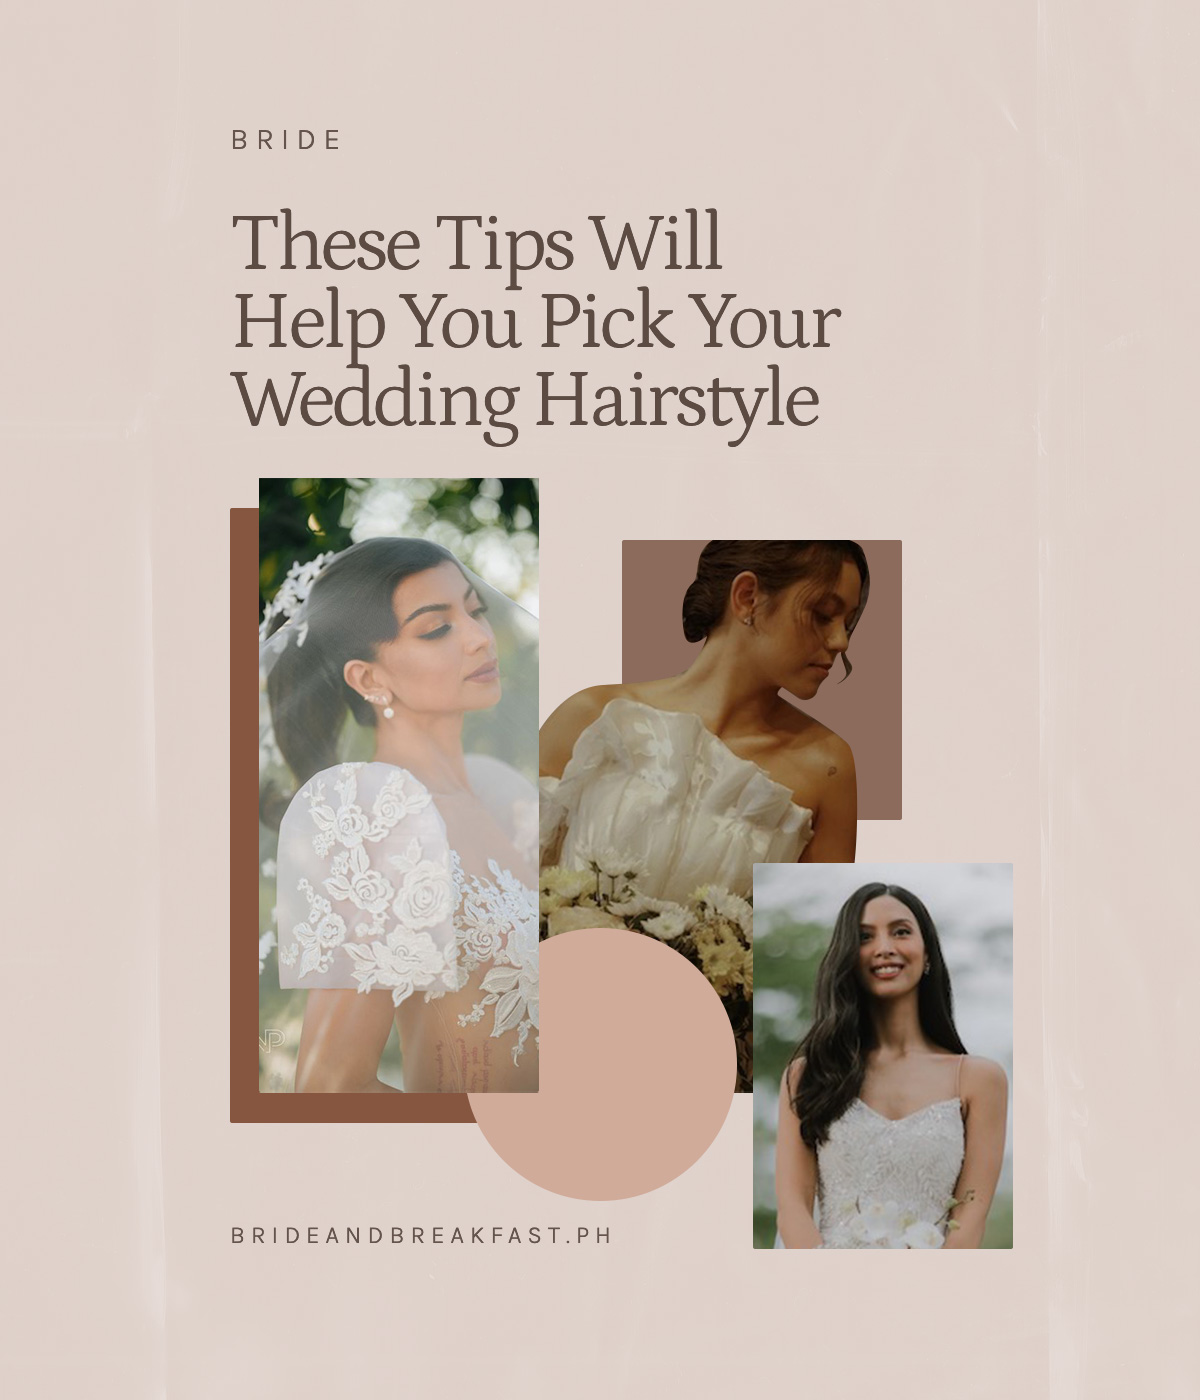 These Tips Will Help You Pick Your Wedding Hairstyle